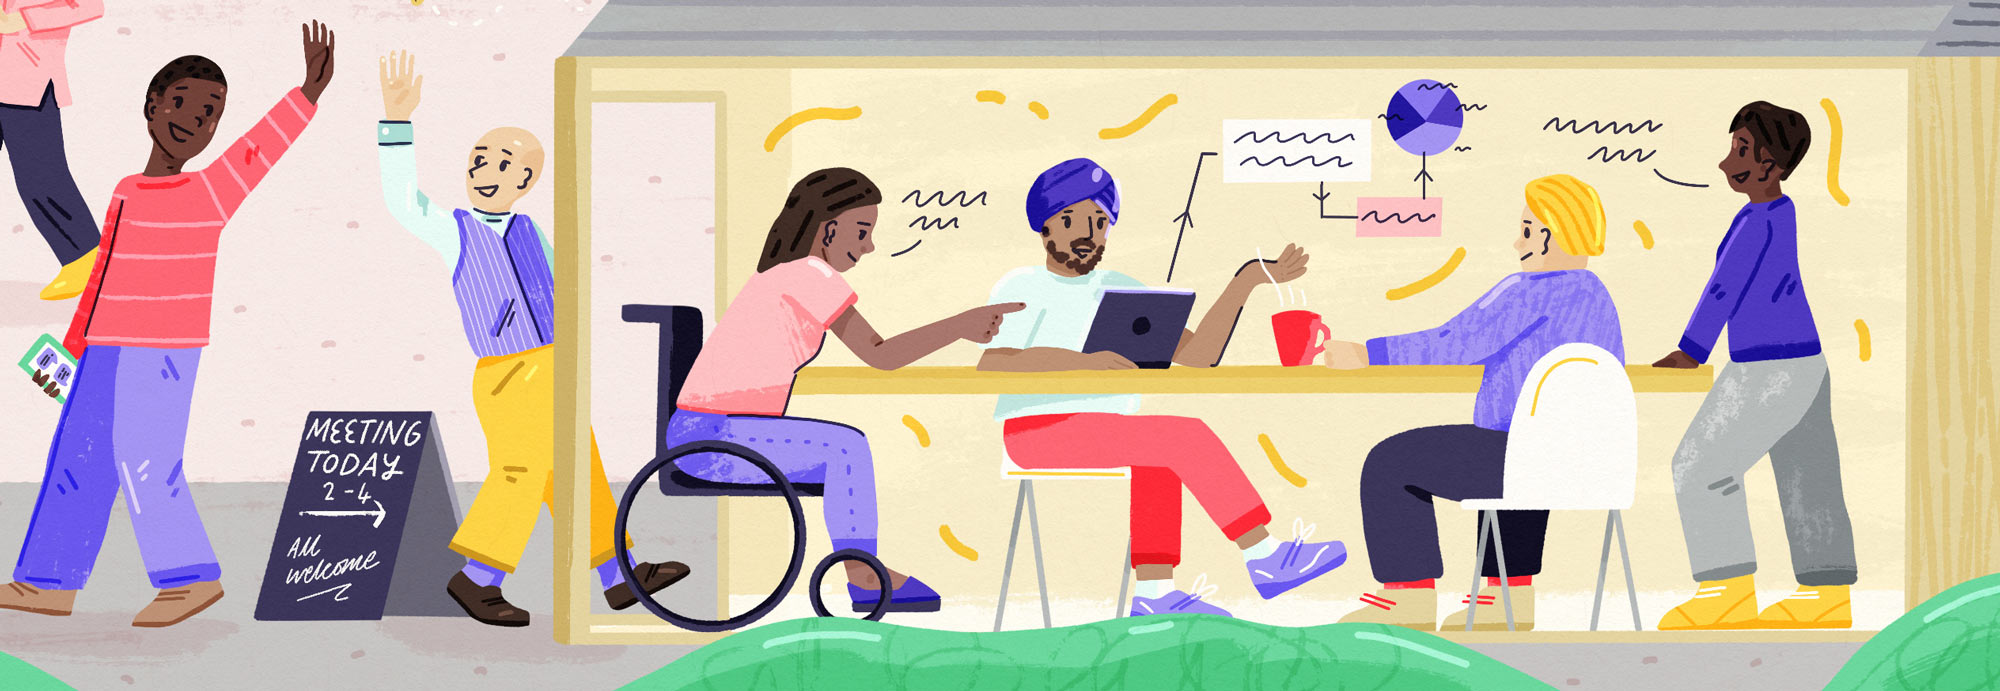 Section of a banner illustration for a community tech website by Elly Jahnz